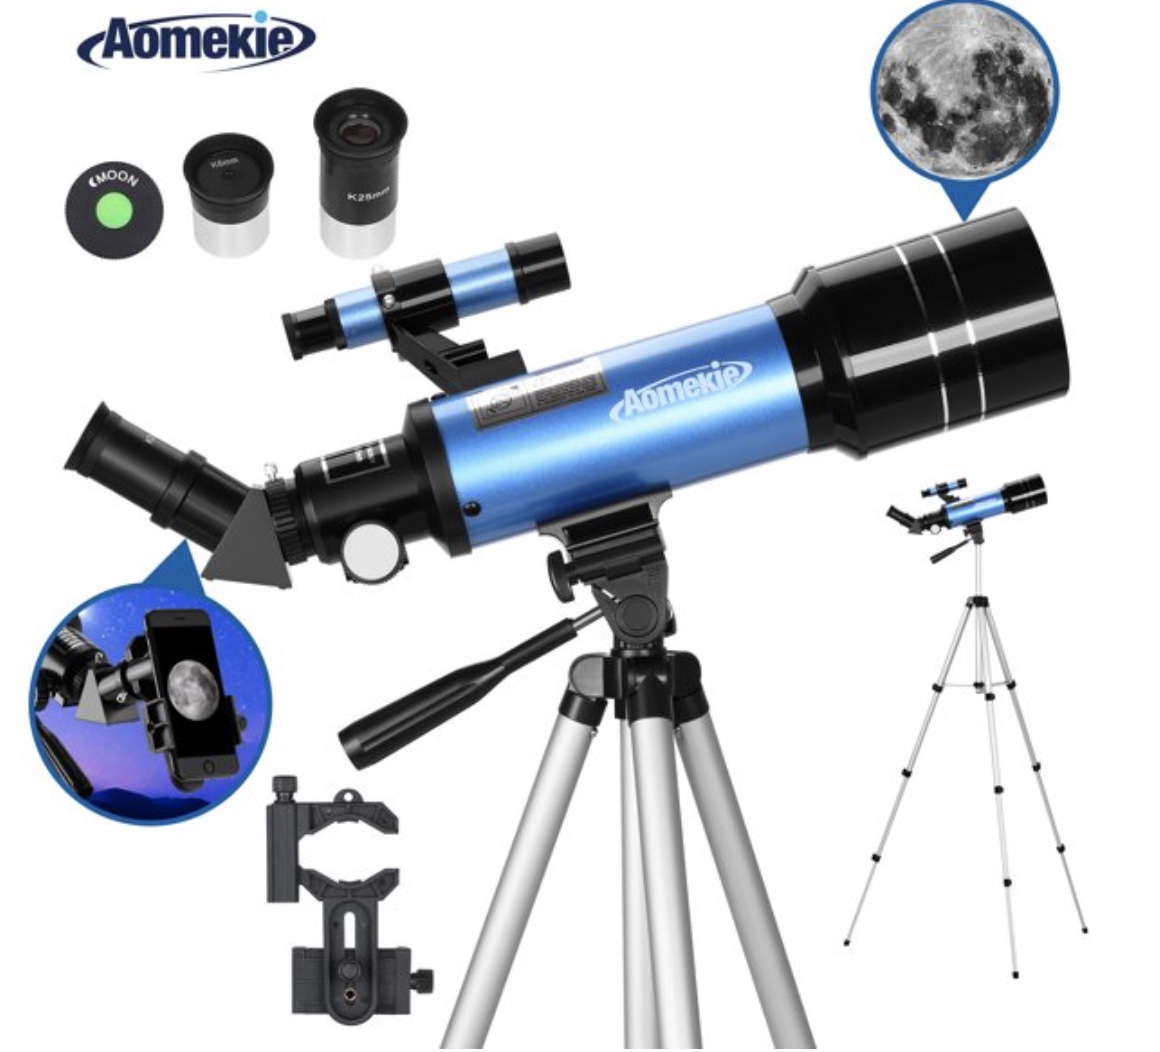 70mm Aperture With Retractable Tripod and Finder Two Eyepieces Black F30070 High Bracket Professional Stargazing Telescopes for Kids & Beginners Telescopes for Adults 